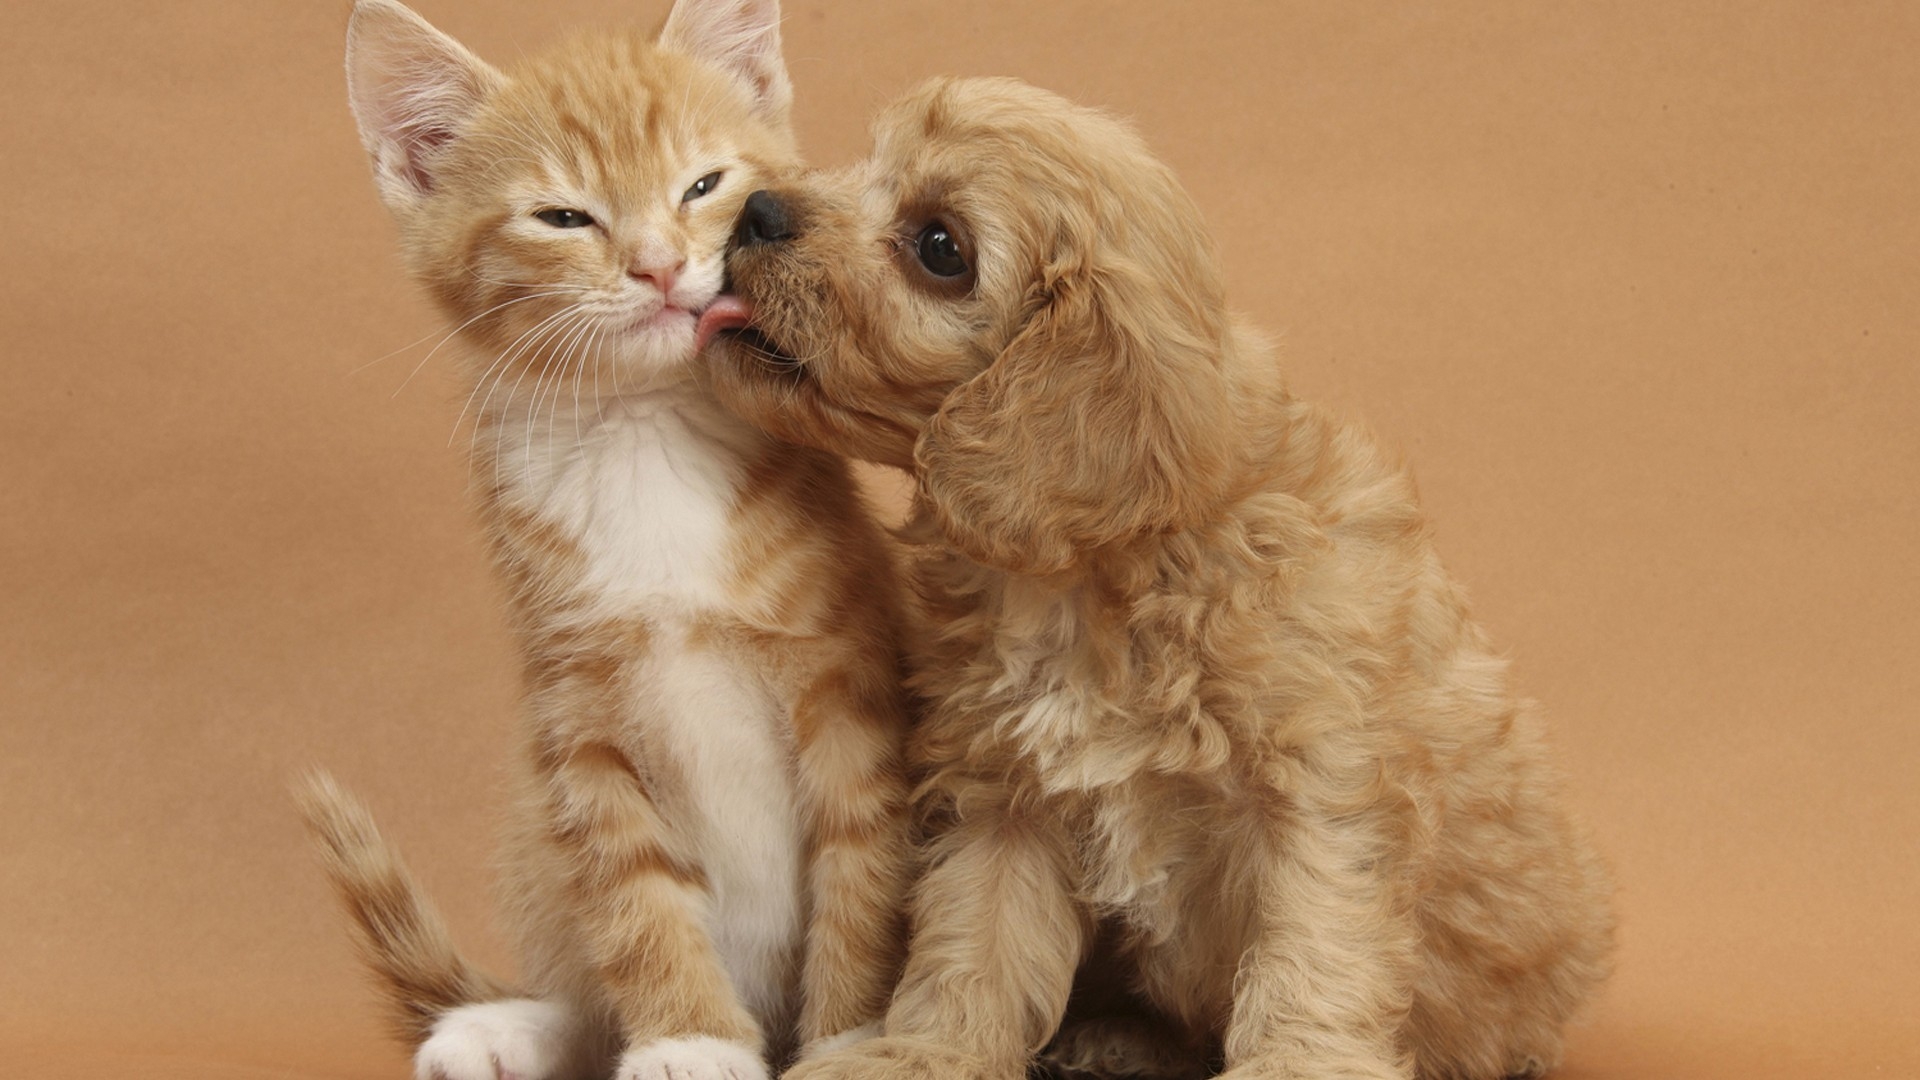 Dog and Cat Kissing for 1920 x 1080 HDTV 1080p resolution